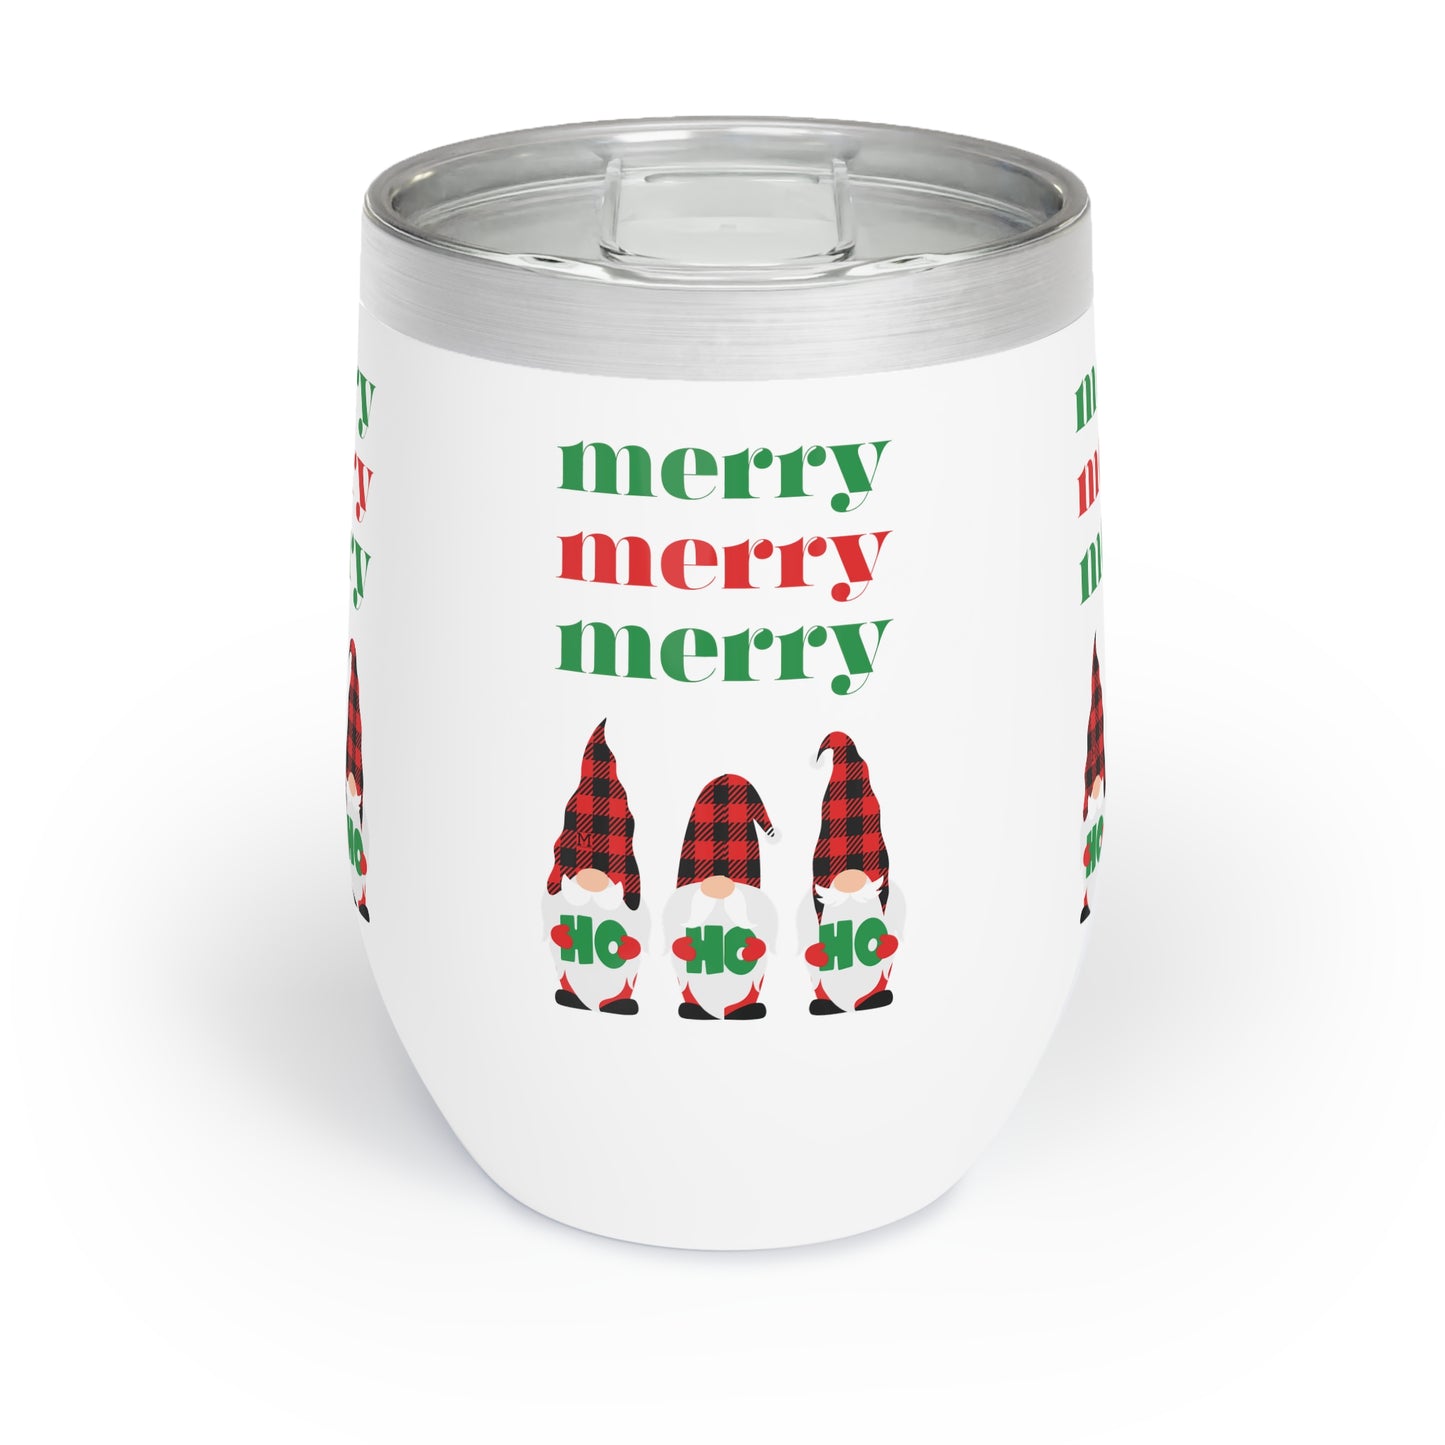 Colorful Christmas Merry Merry Merry Ho Ho Ho Chill Wine Tumbler by MII Designs 2